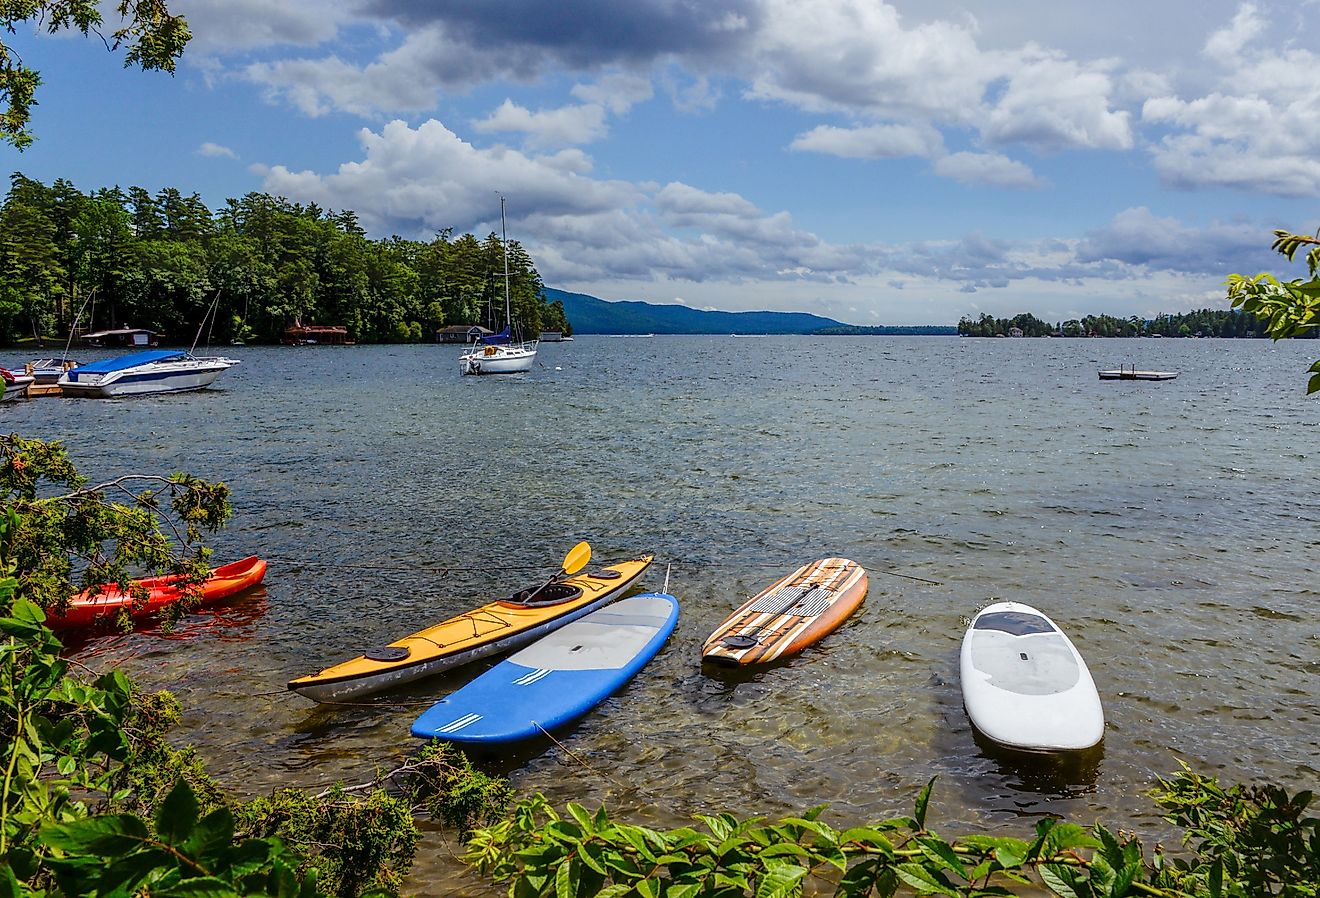 Stand up paddle boards along Lake George, New York.